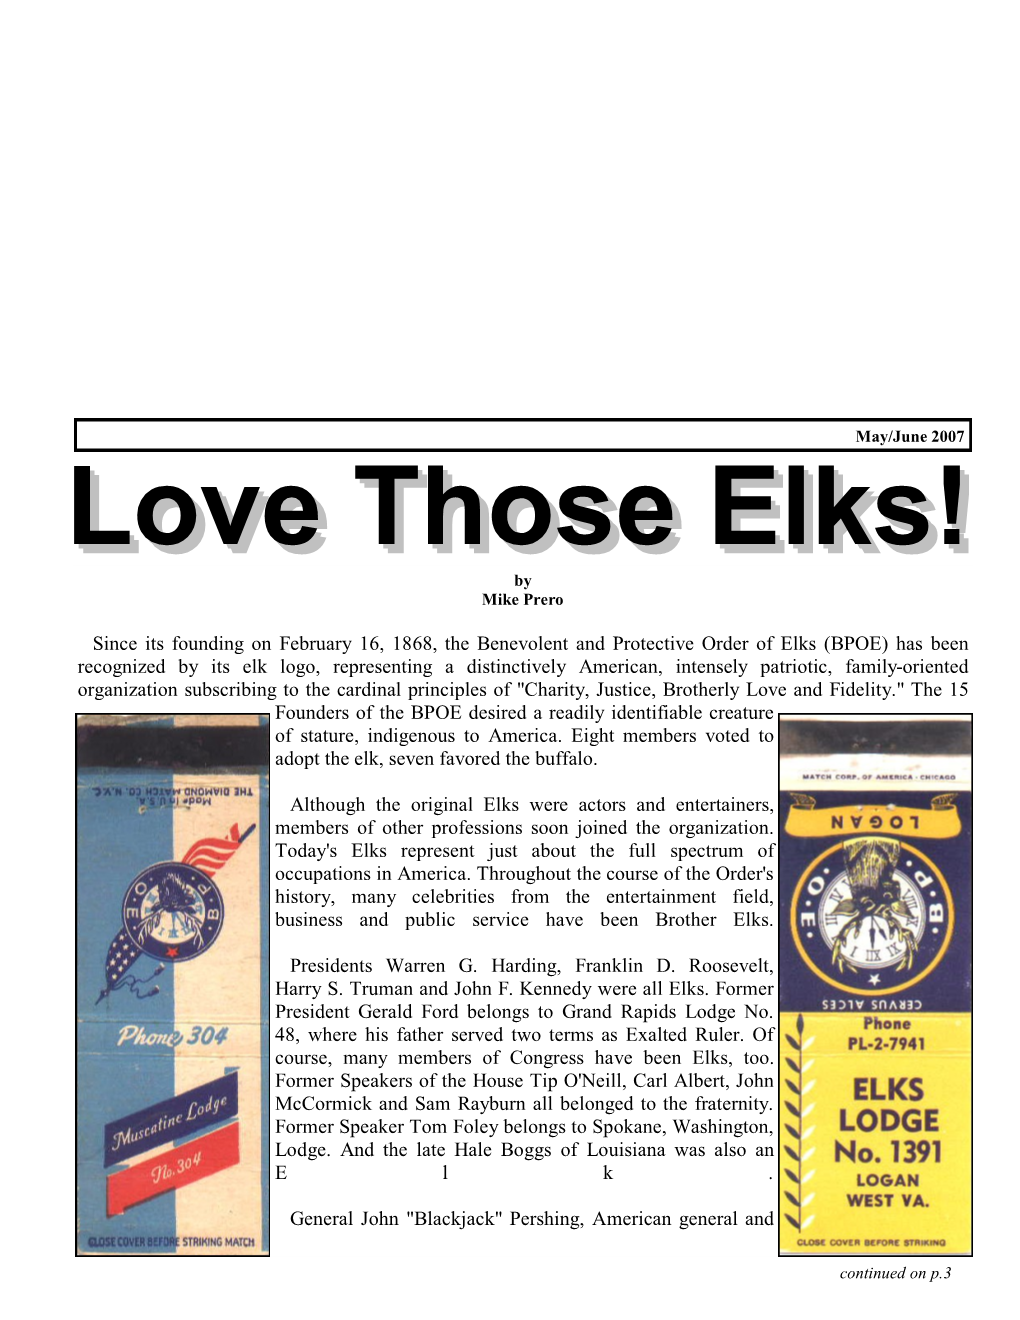 Since Its Founding on February 16, 1868, the Benevolent and Protective Order of Elks (BPOE) Has Been Recognized by Its Elk Logo